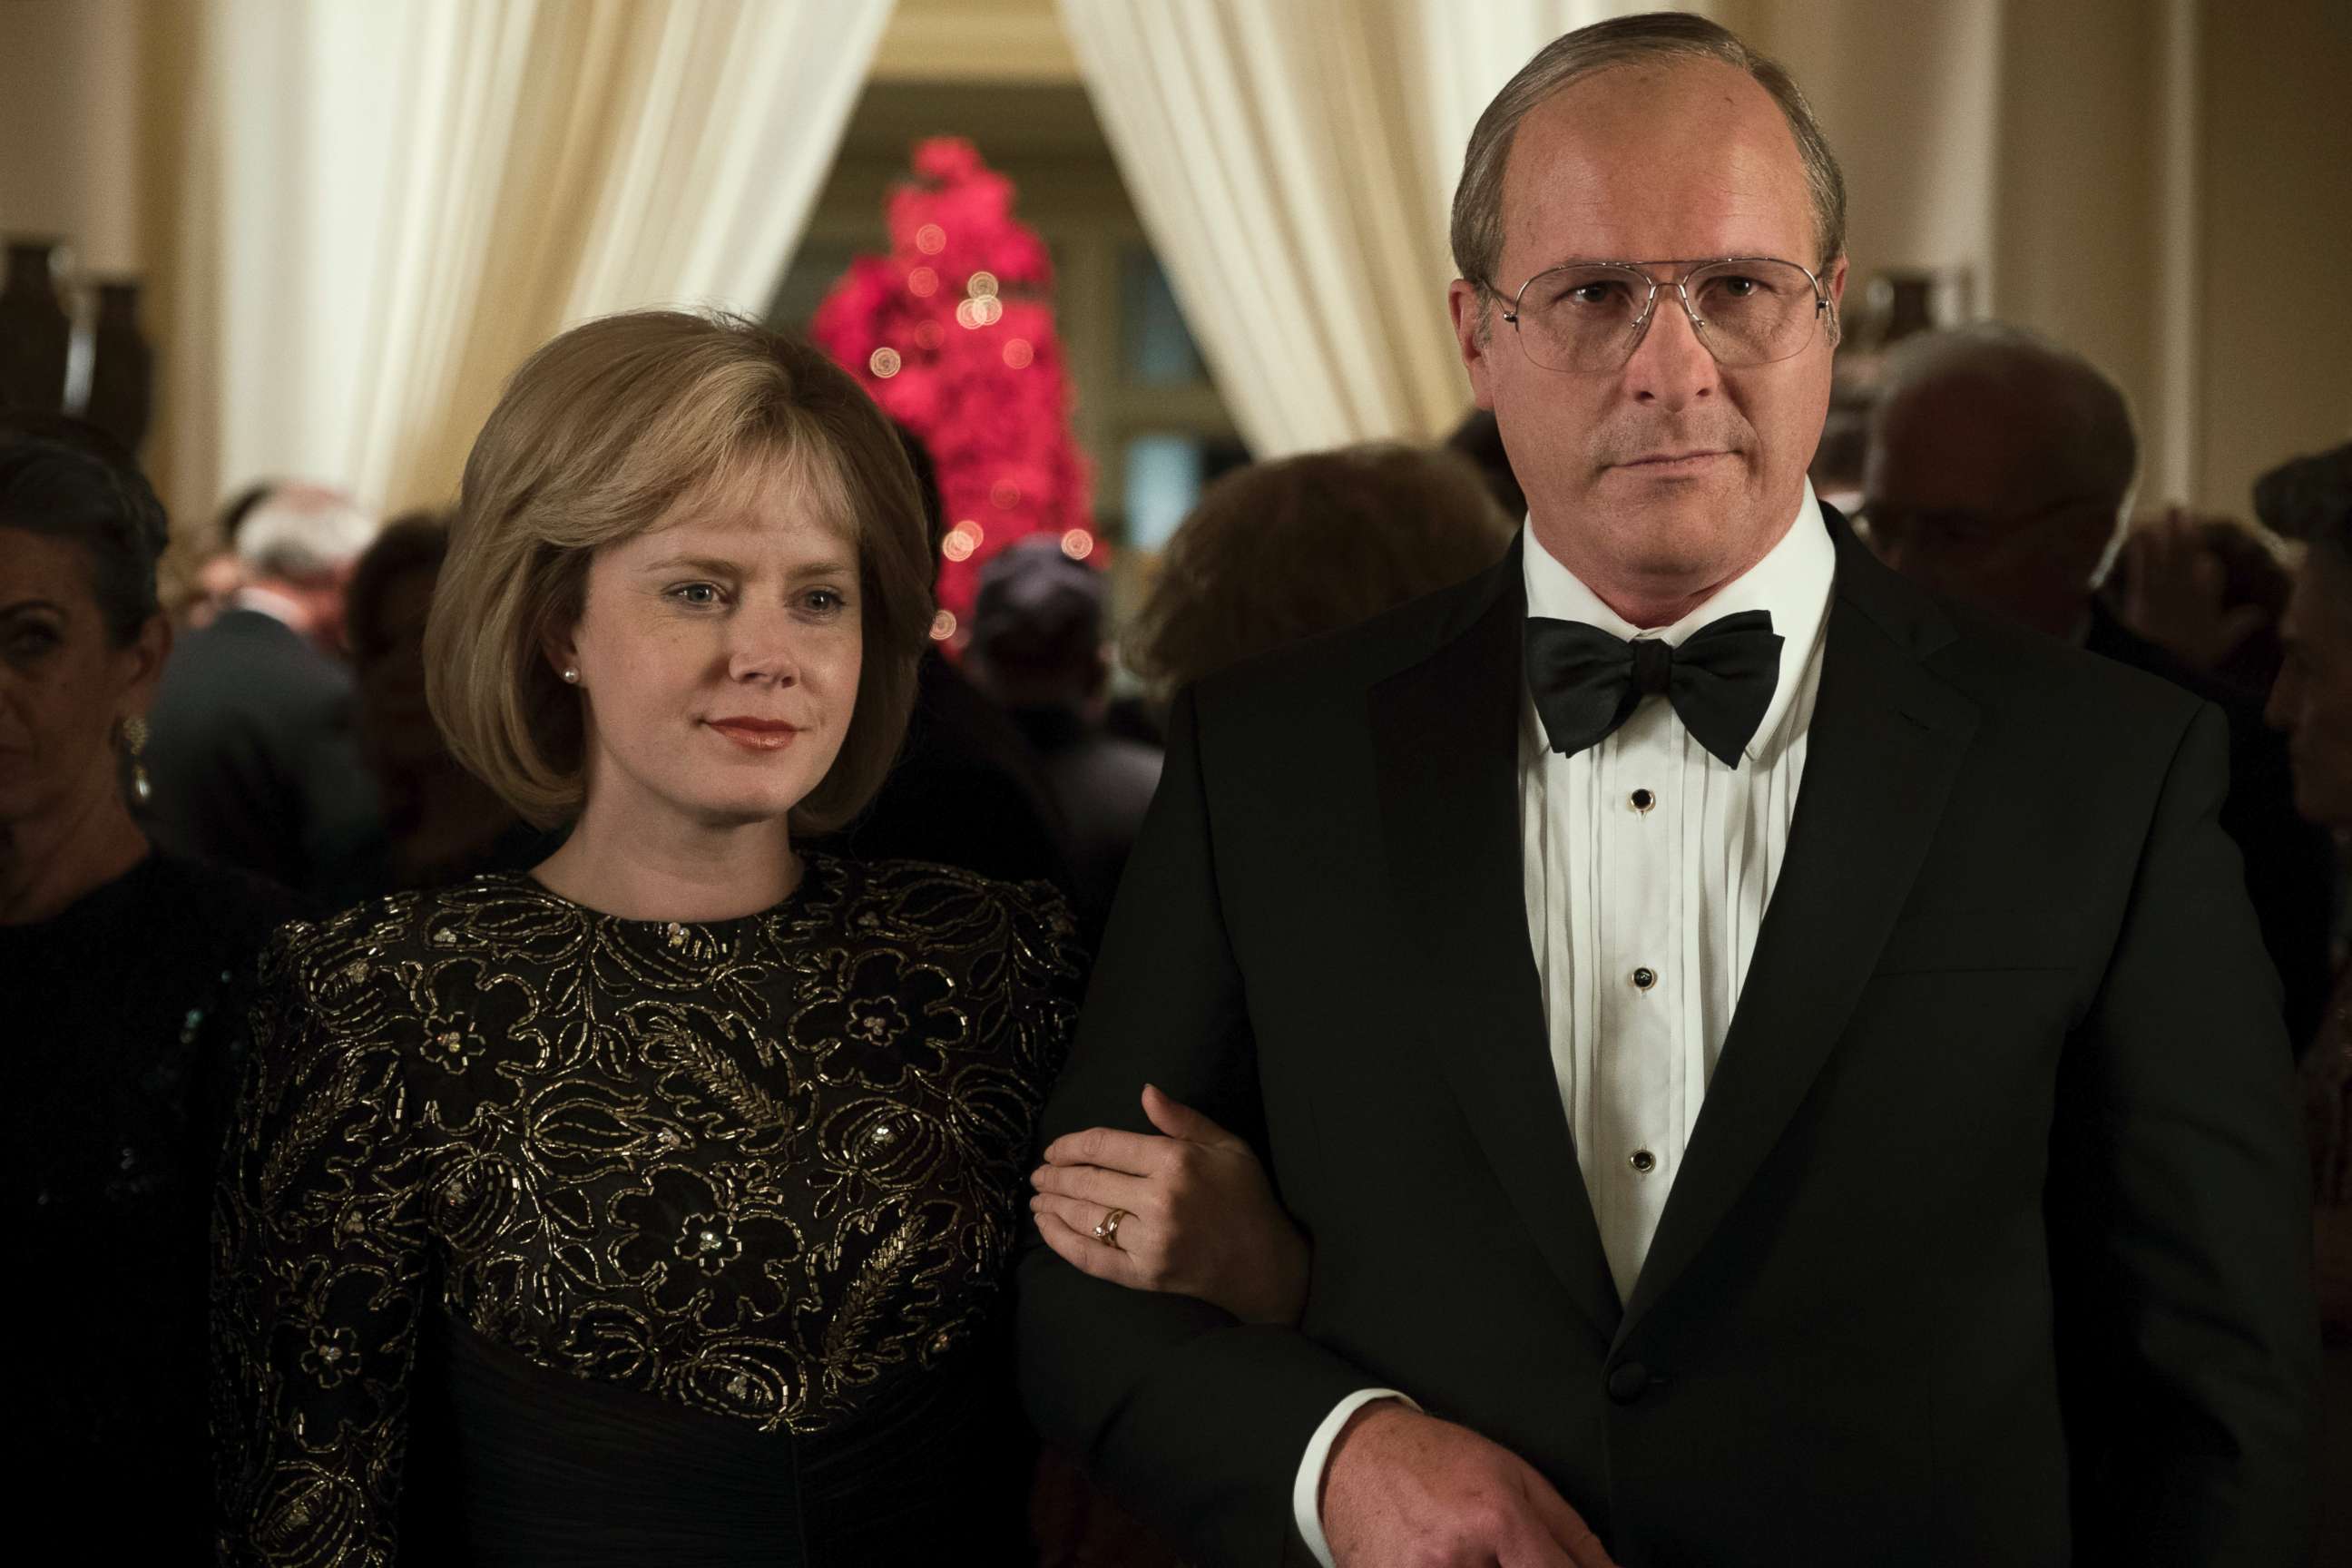 PHOTO: Amy Adams as Lynne Cheney and Christian Bale as Dick Cheney in "Vice."